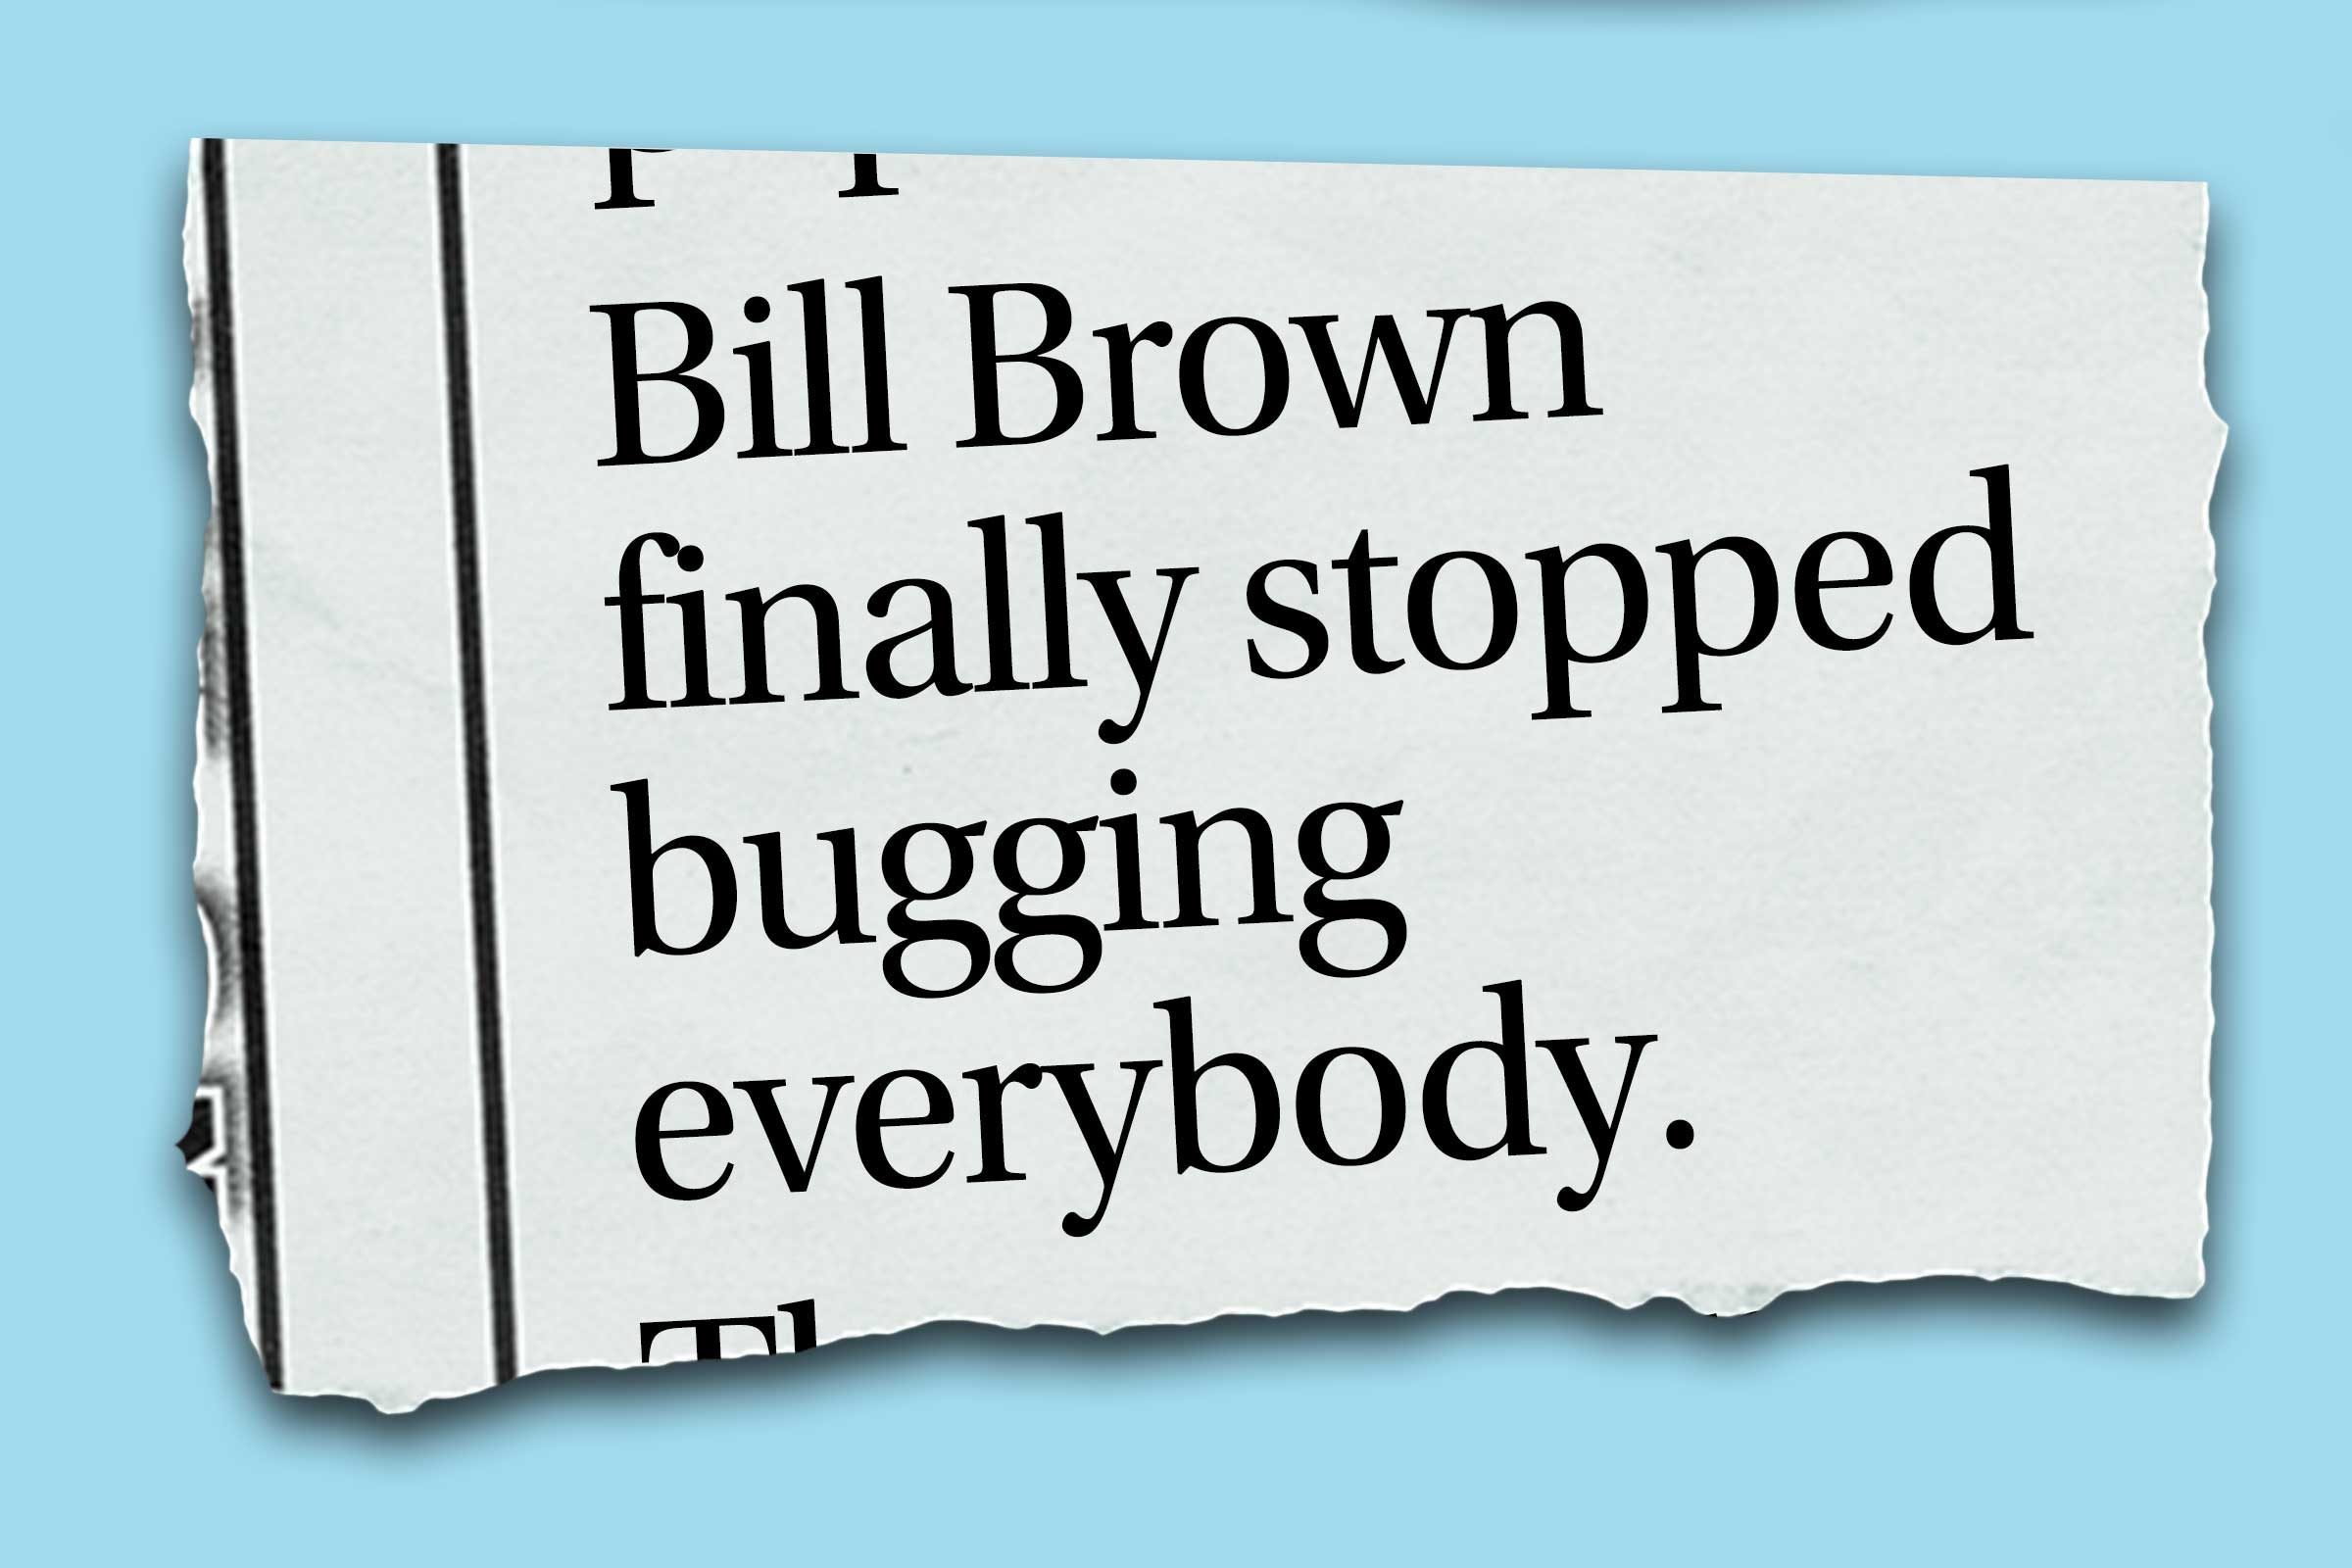 Funniest obituaries that really exist - Bill Brown finally stopped bugging everybody.